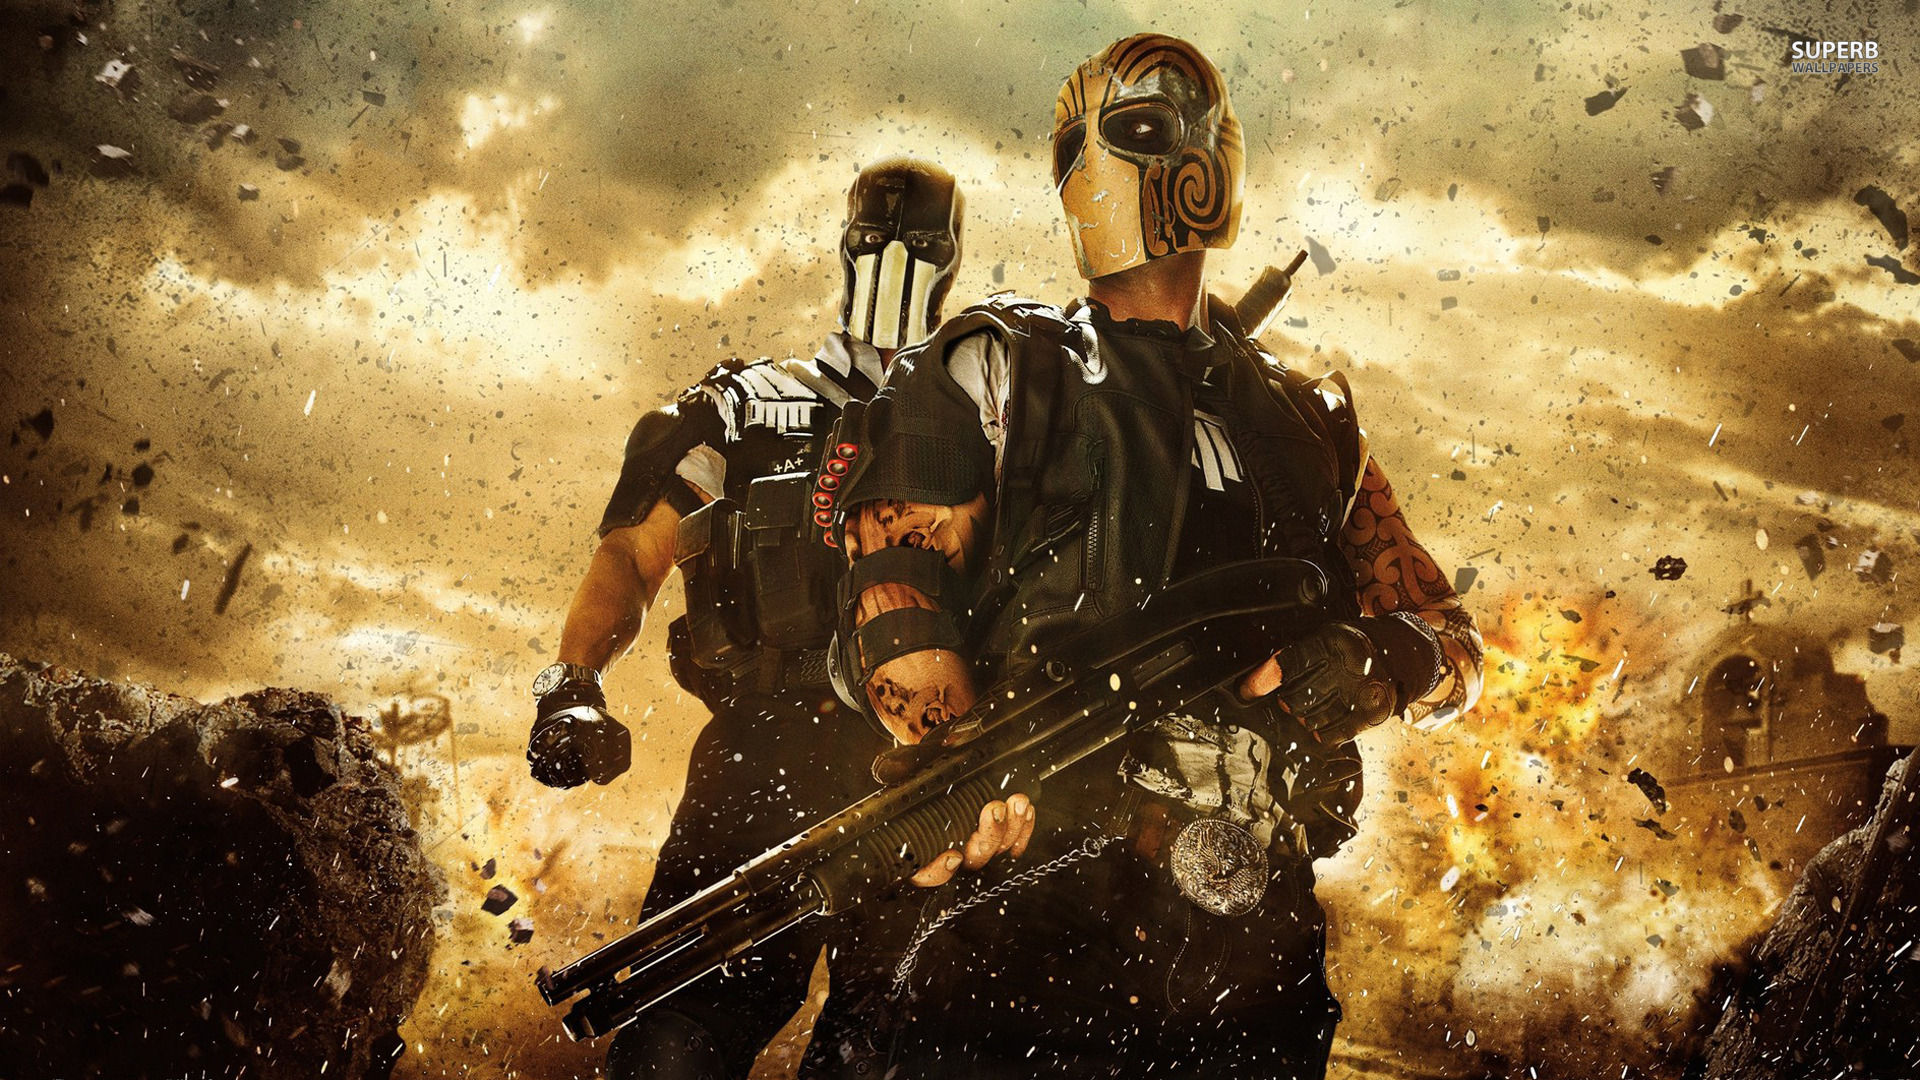 Alpha and Bravo - Army of Two: The Devil's Cartel wallpaper 1920x1080 jpg